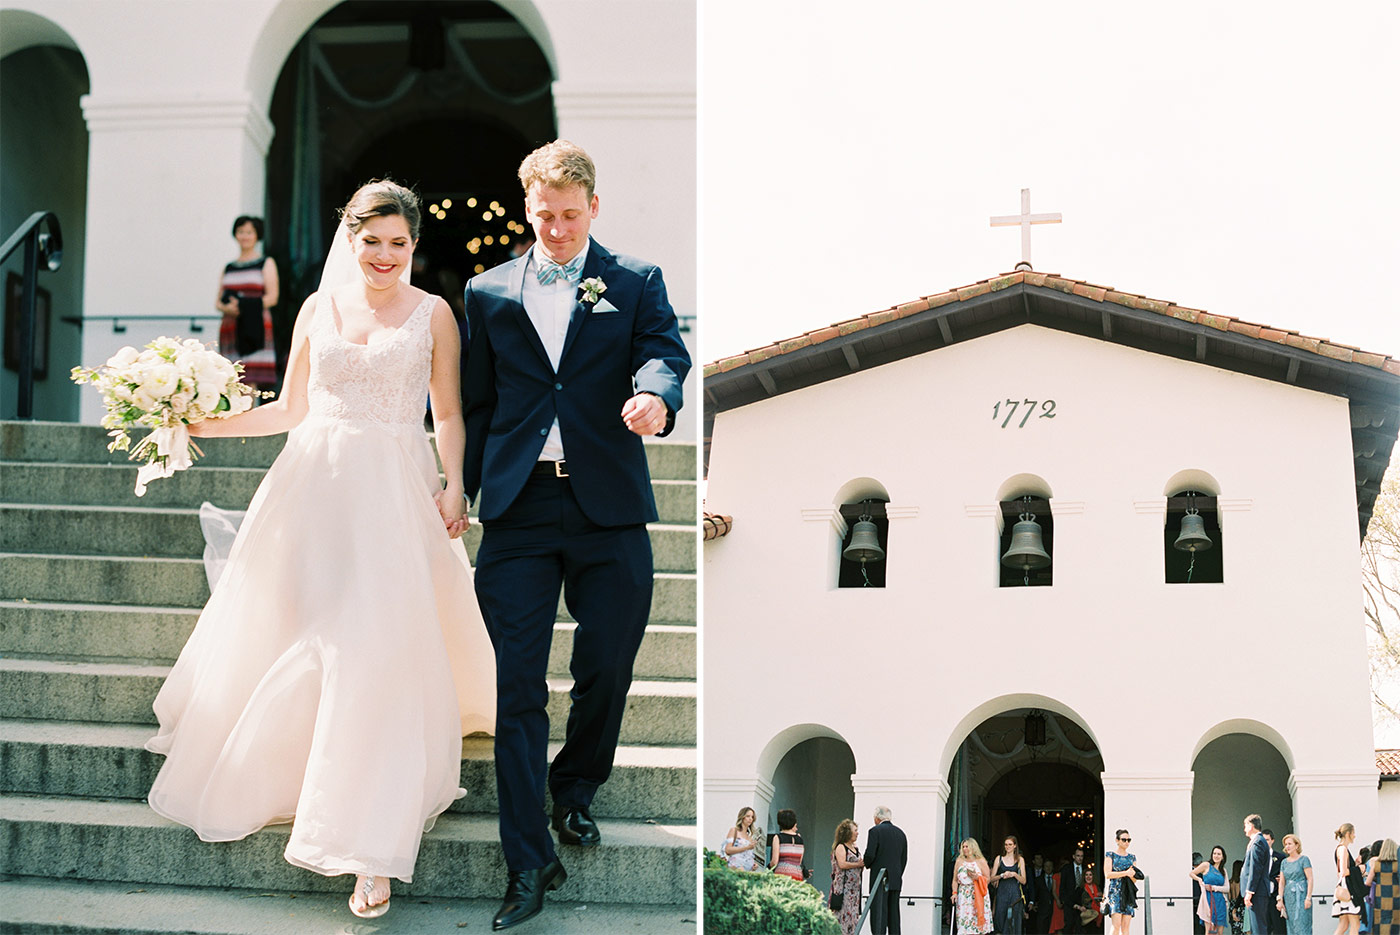 San Luis Obispo Mission Wedding photographed by Ashley Ludaescher Photography